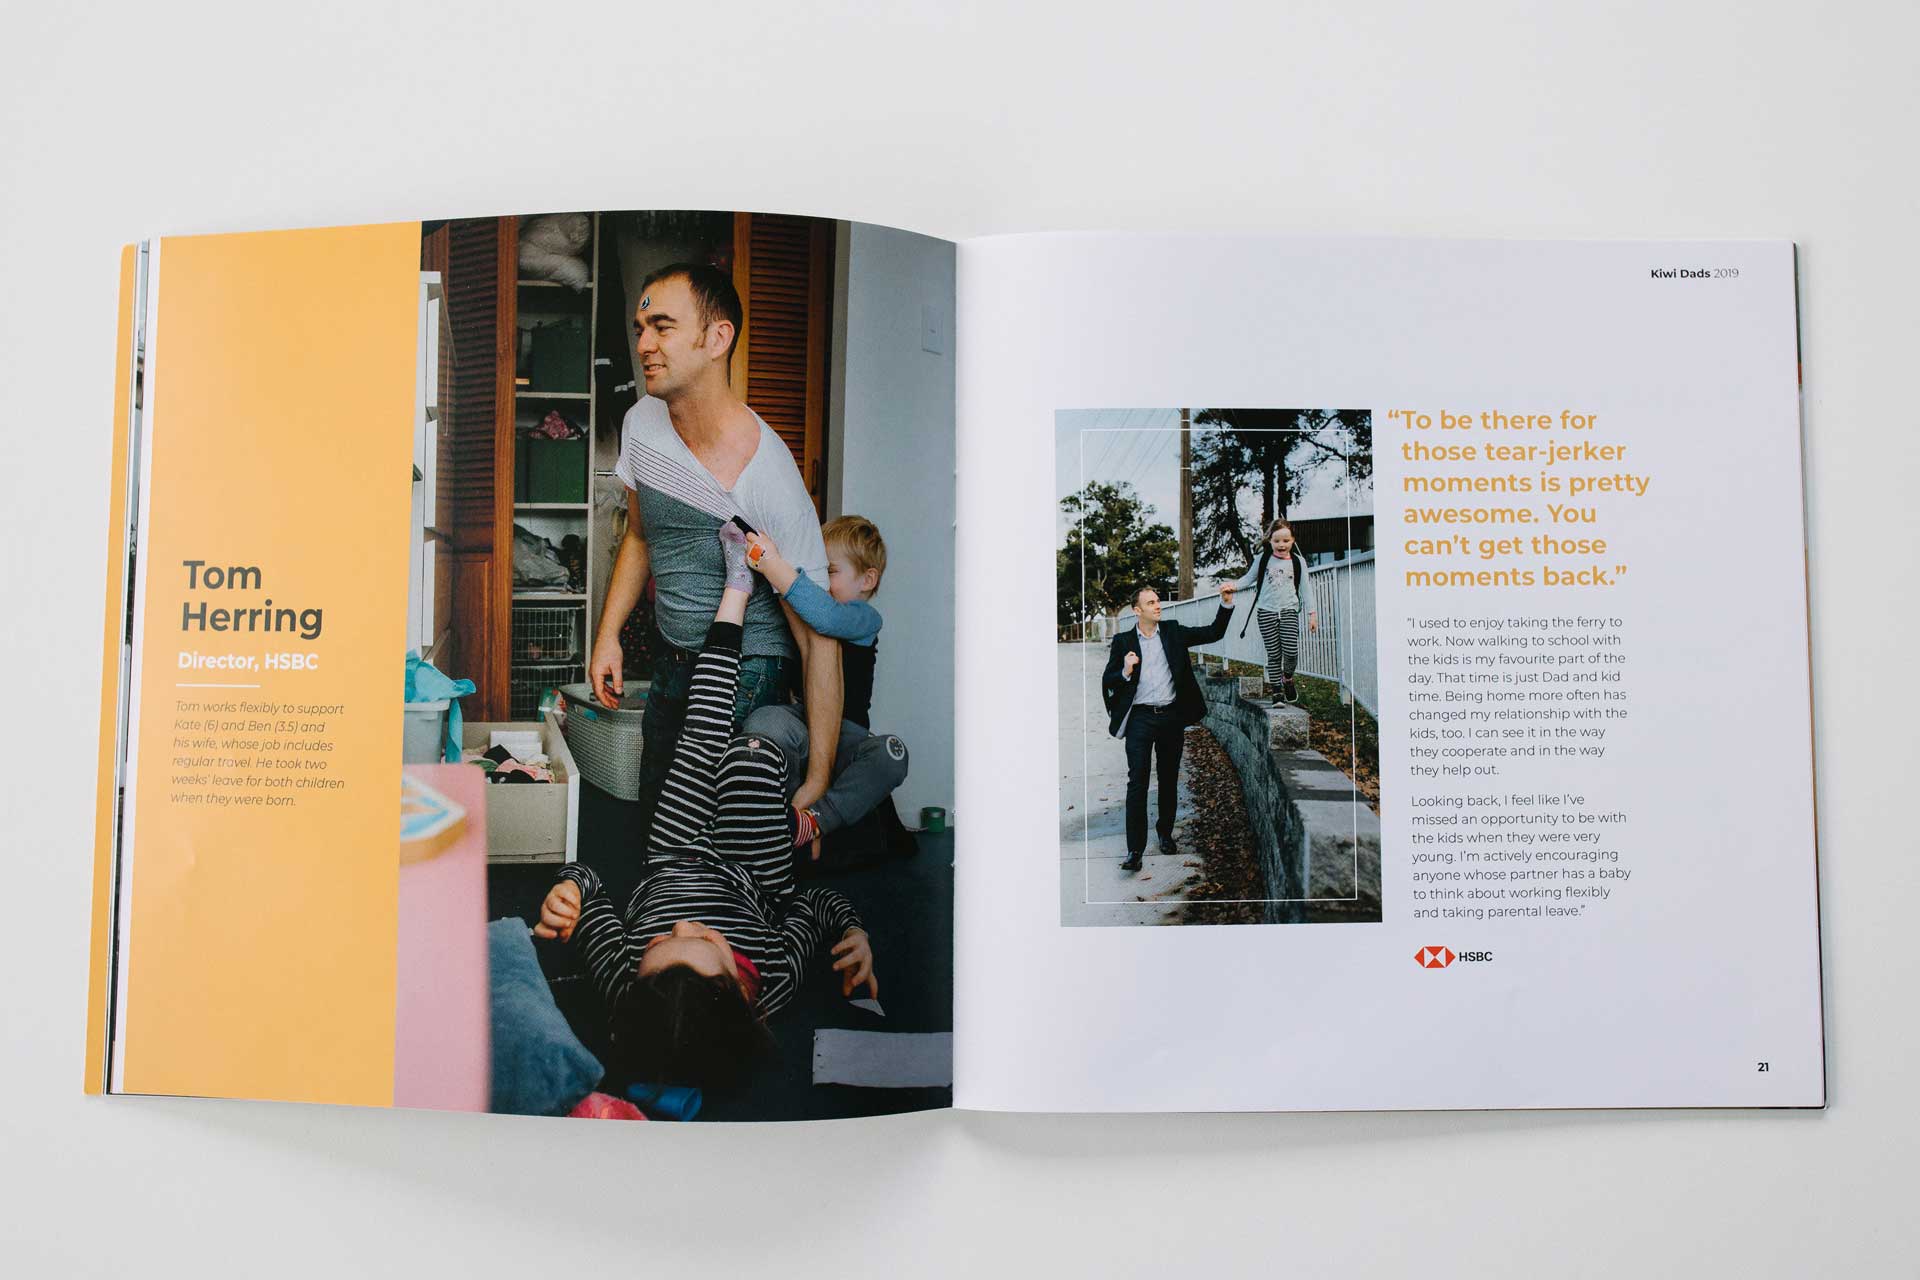 kiwi dads booklet photo of tom herring of hsbc walking nad playing with children photos by sarah weber photography